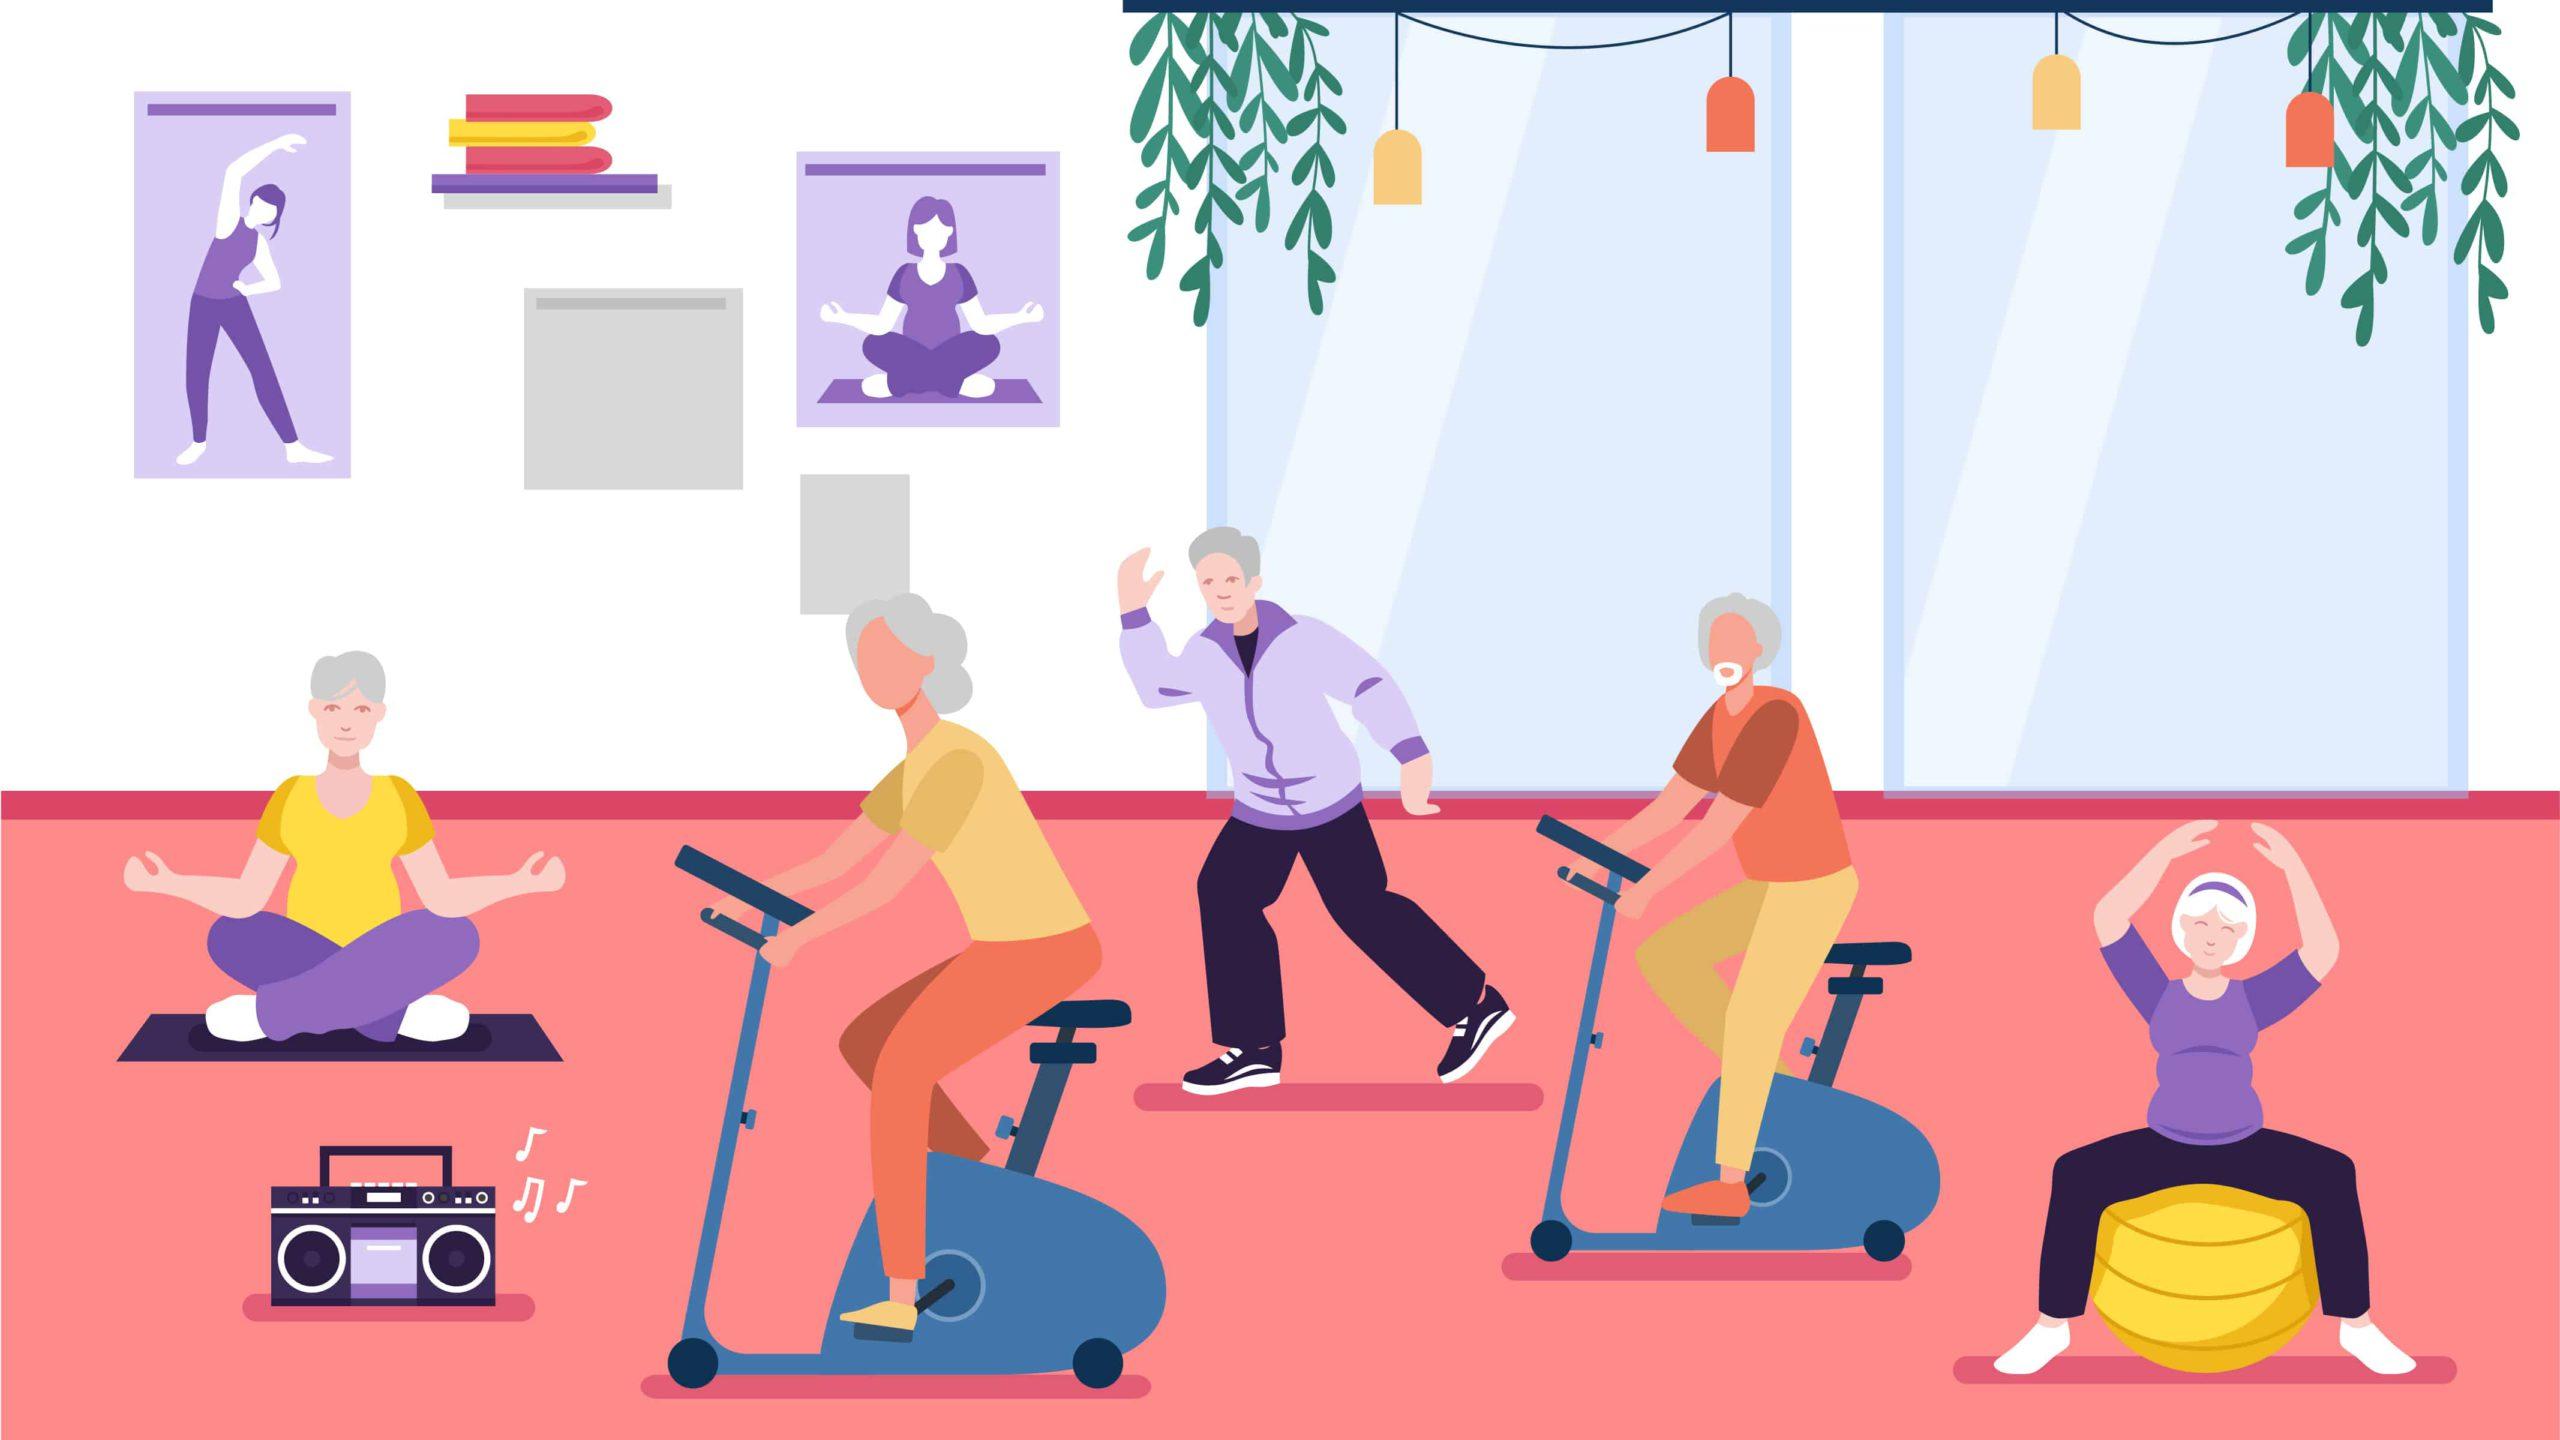 Low Impact and Gentle Chair Exercises for Seniors: Learn Cardio, Yoga, Core  and Strength Training to Improve Endurance, Balance, and Flexibility in